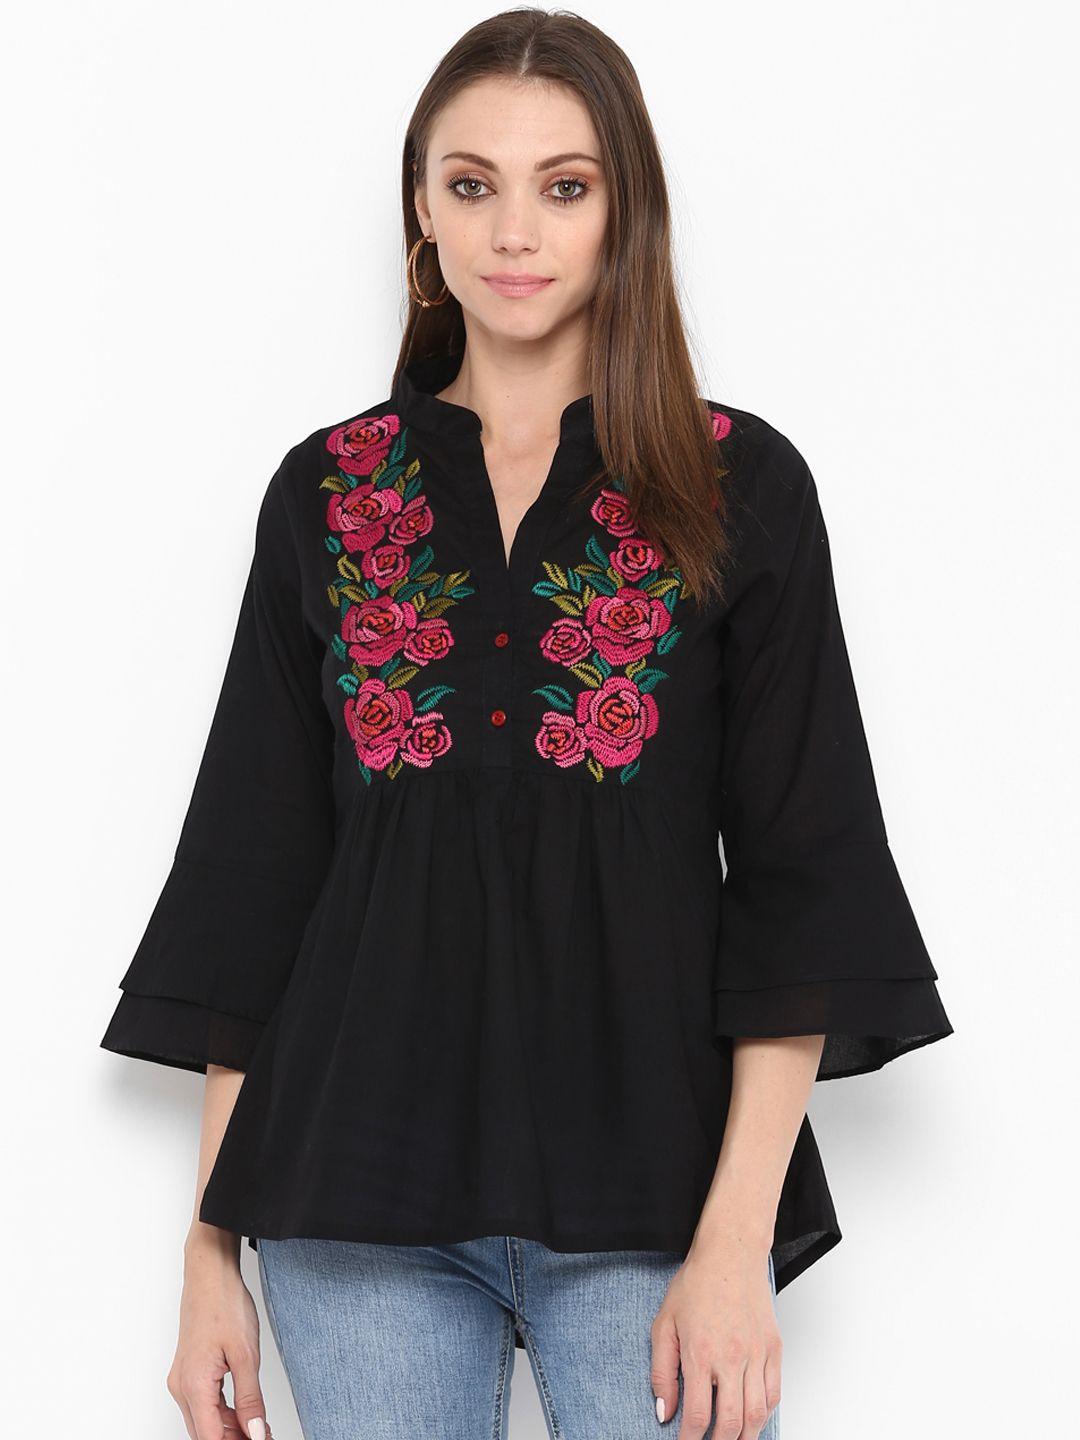 bhama couture women black floral printed pure cotton top